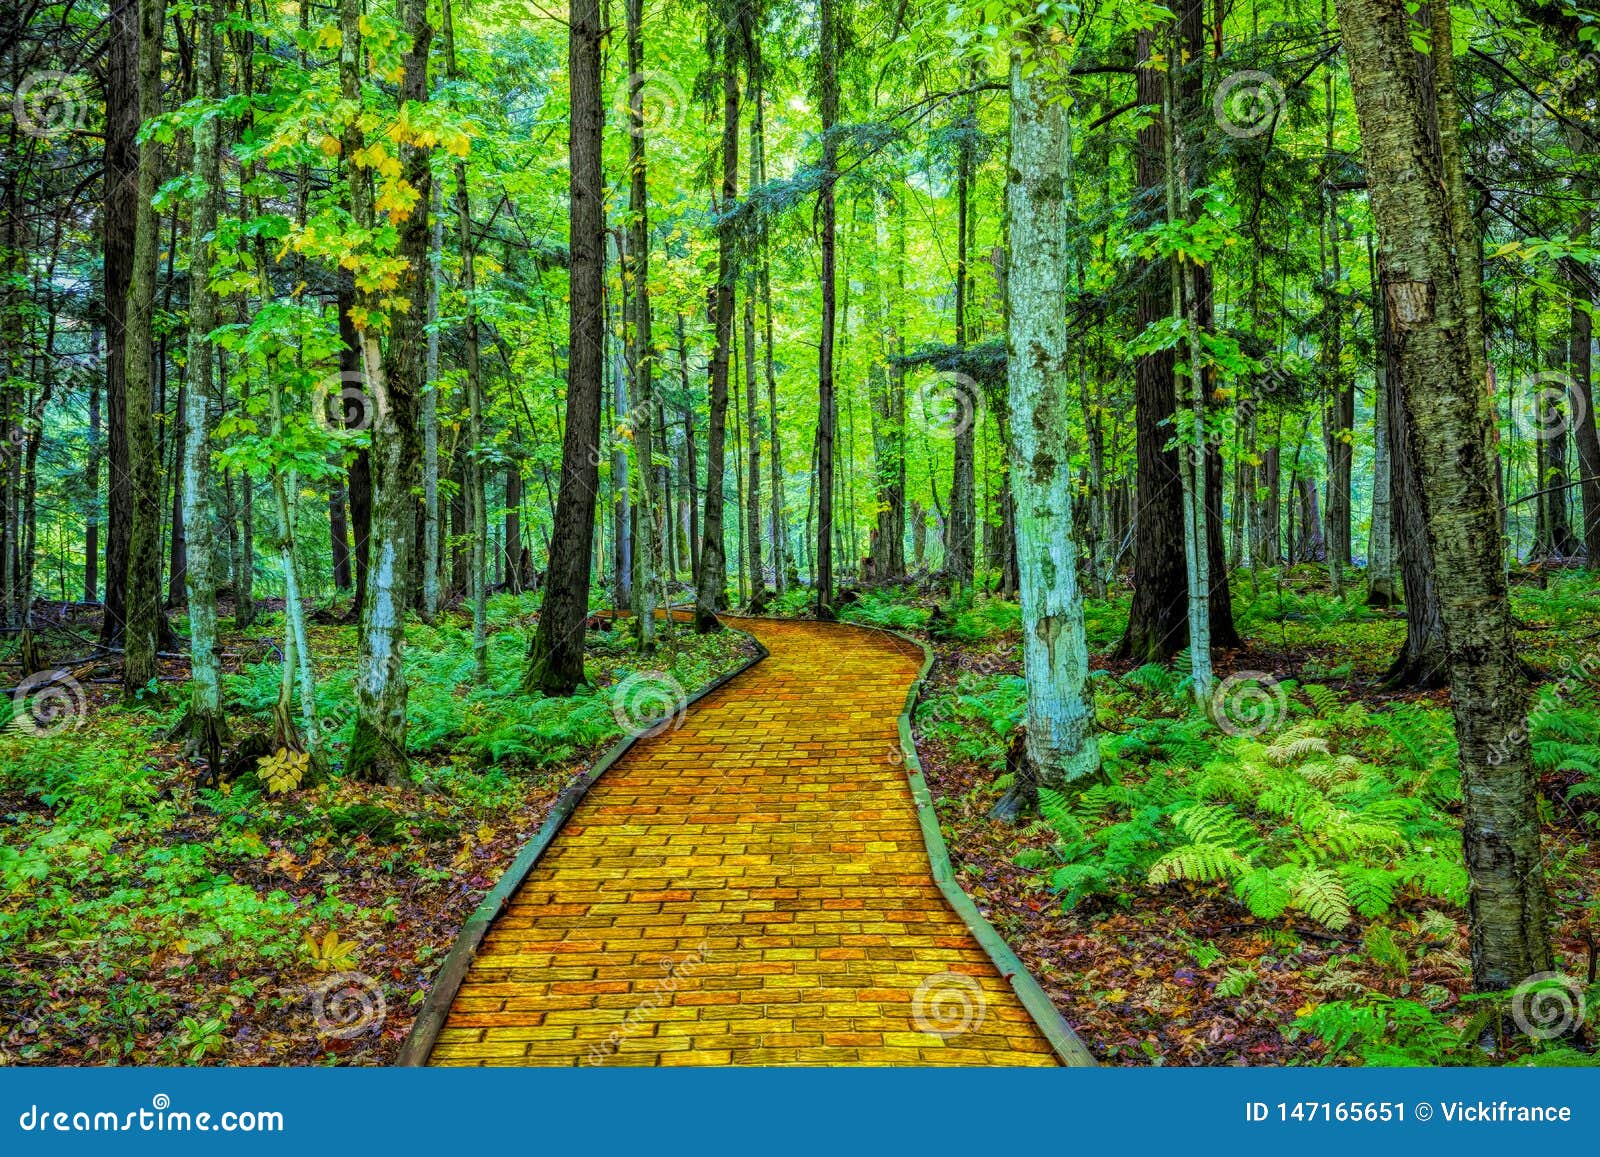 yellow brick road through forest